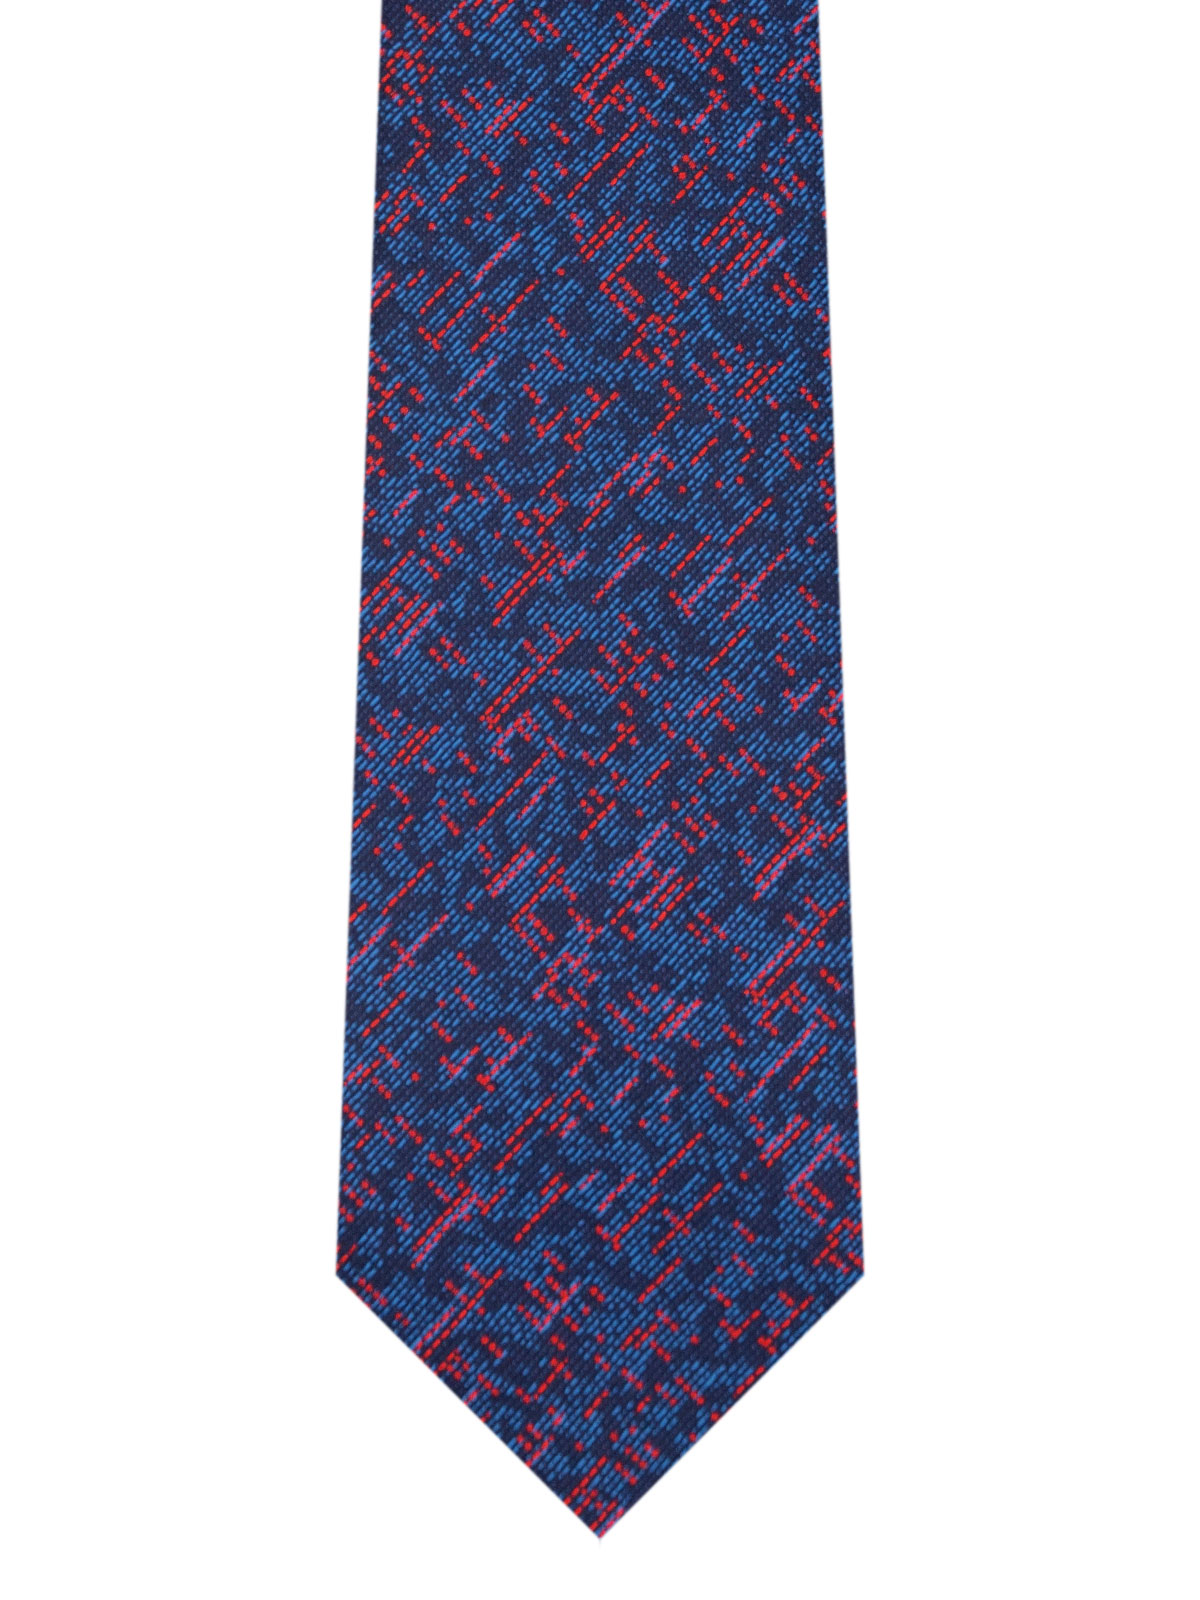 Tie in blue and colored threads - 10182 - € 14.06 img2